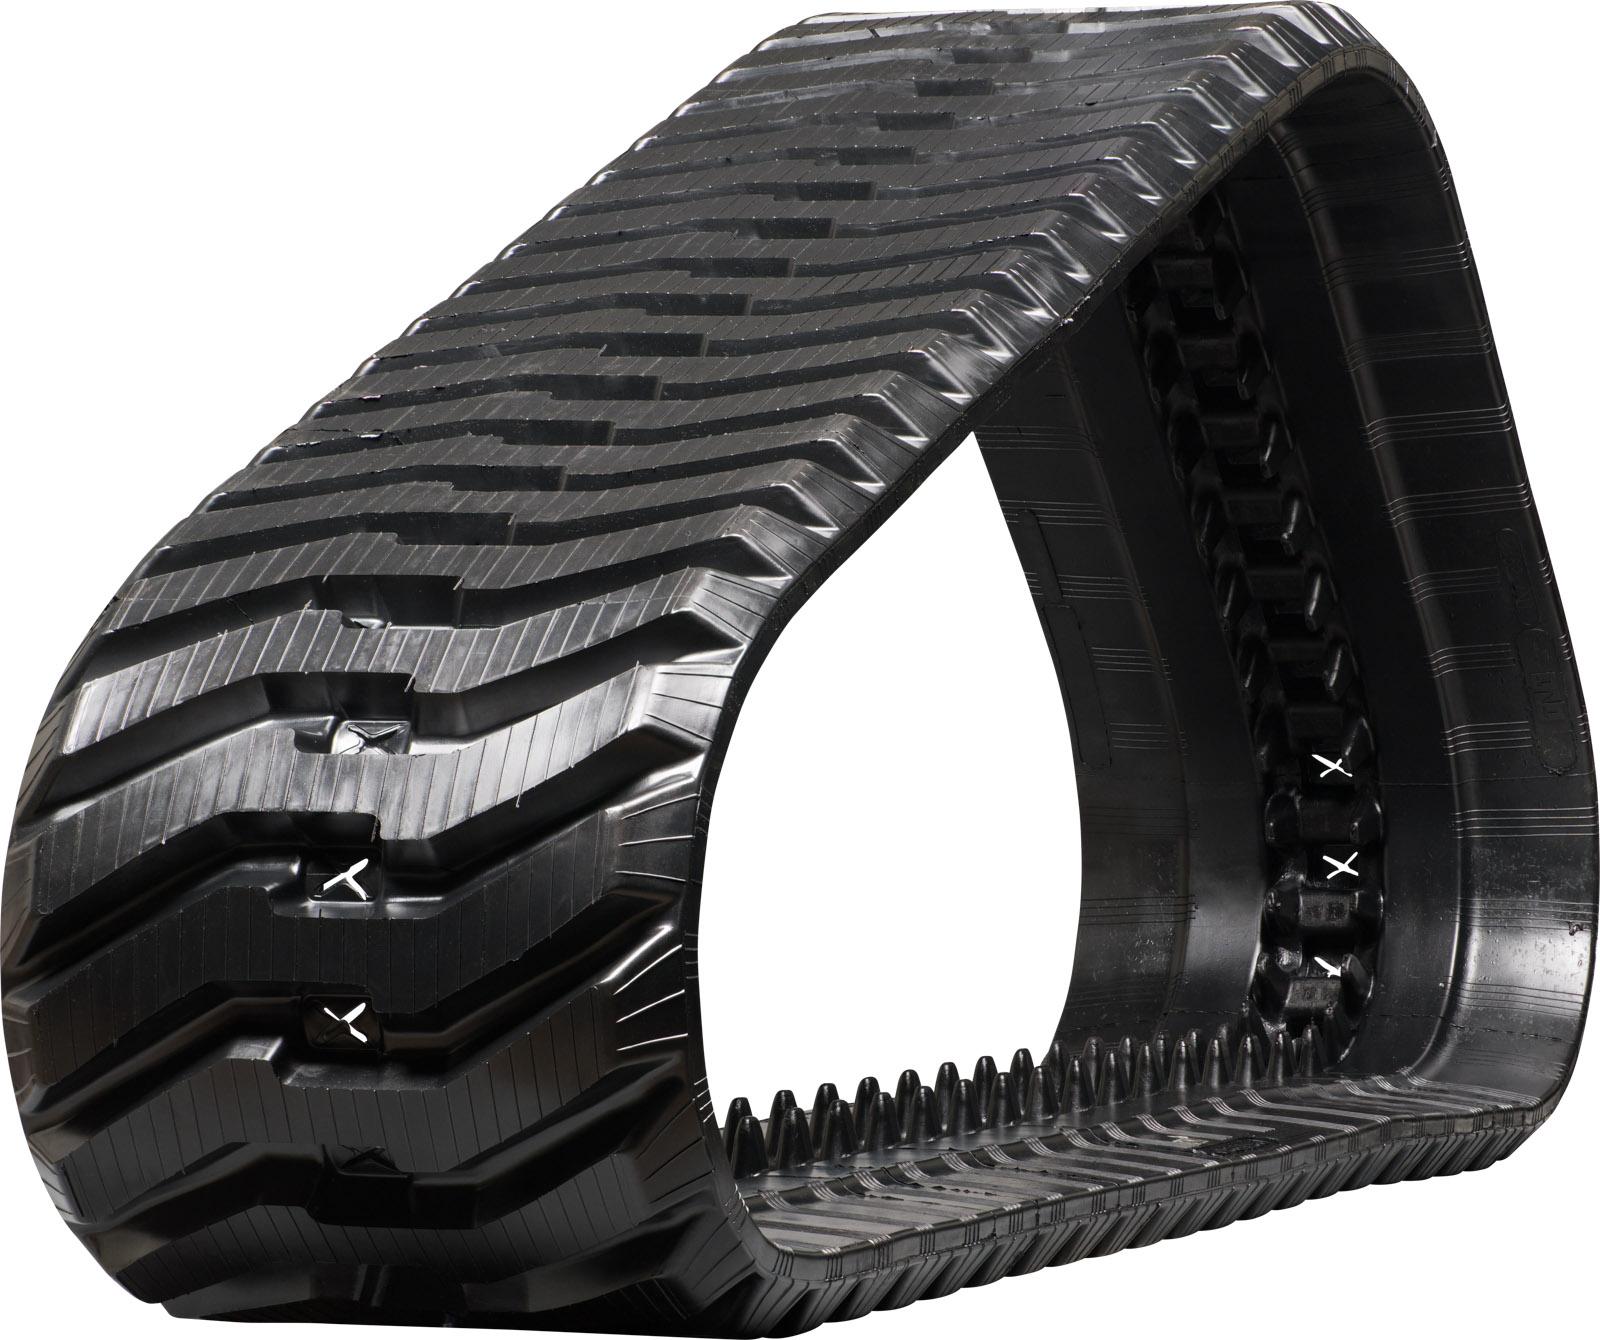 set of 2 18" extreme duty bd pattern rubber track (450x86lx55)